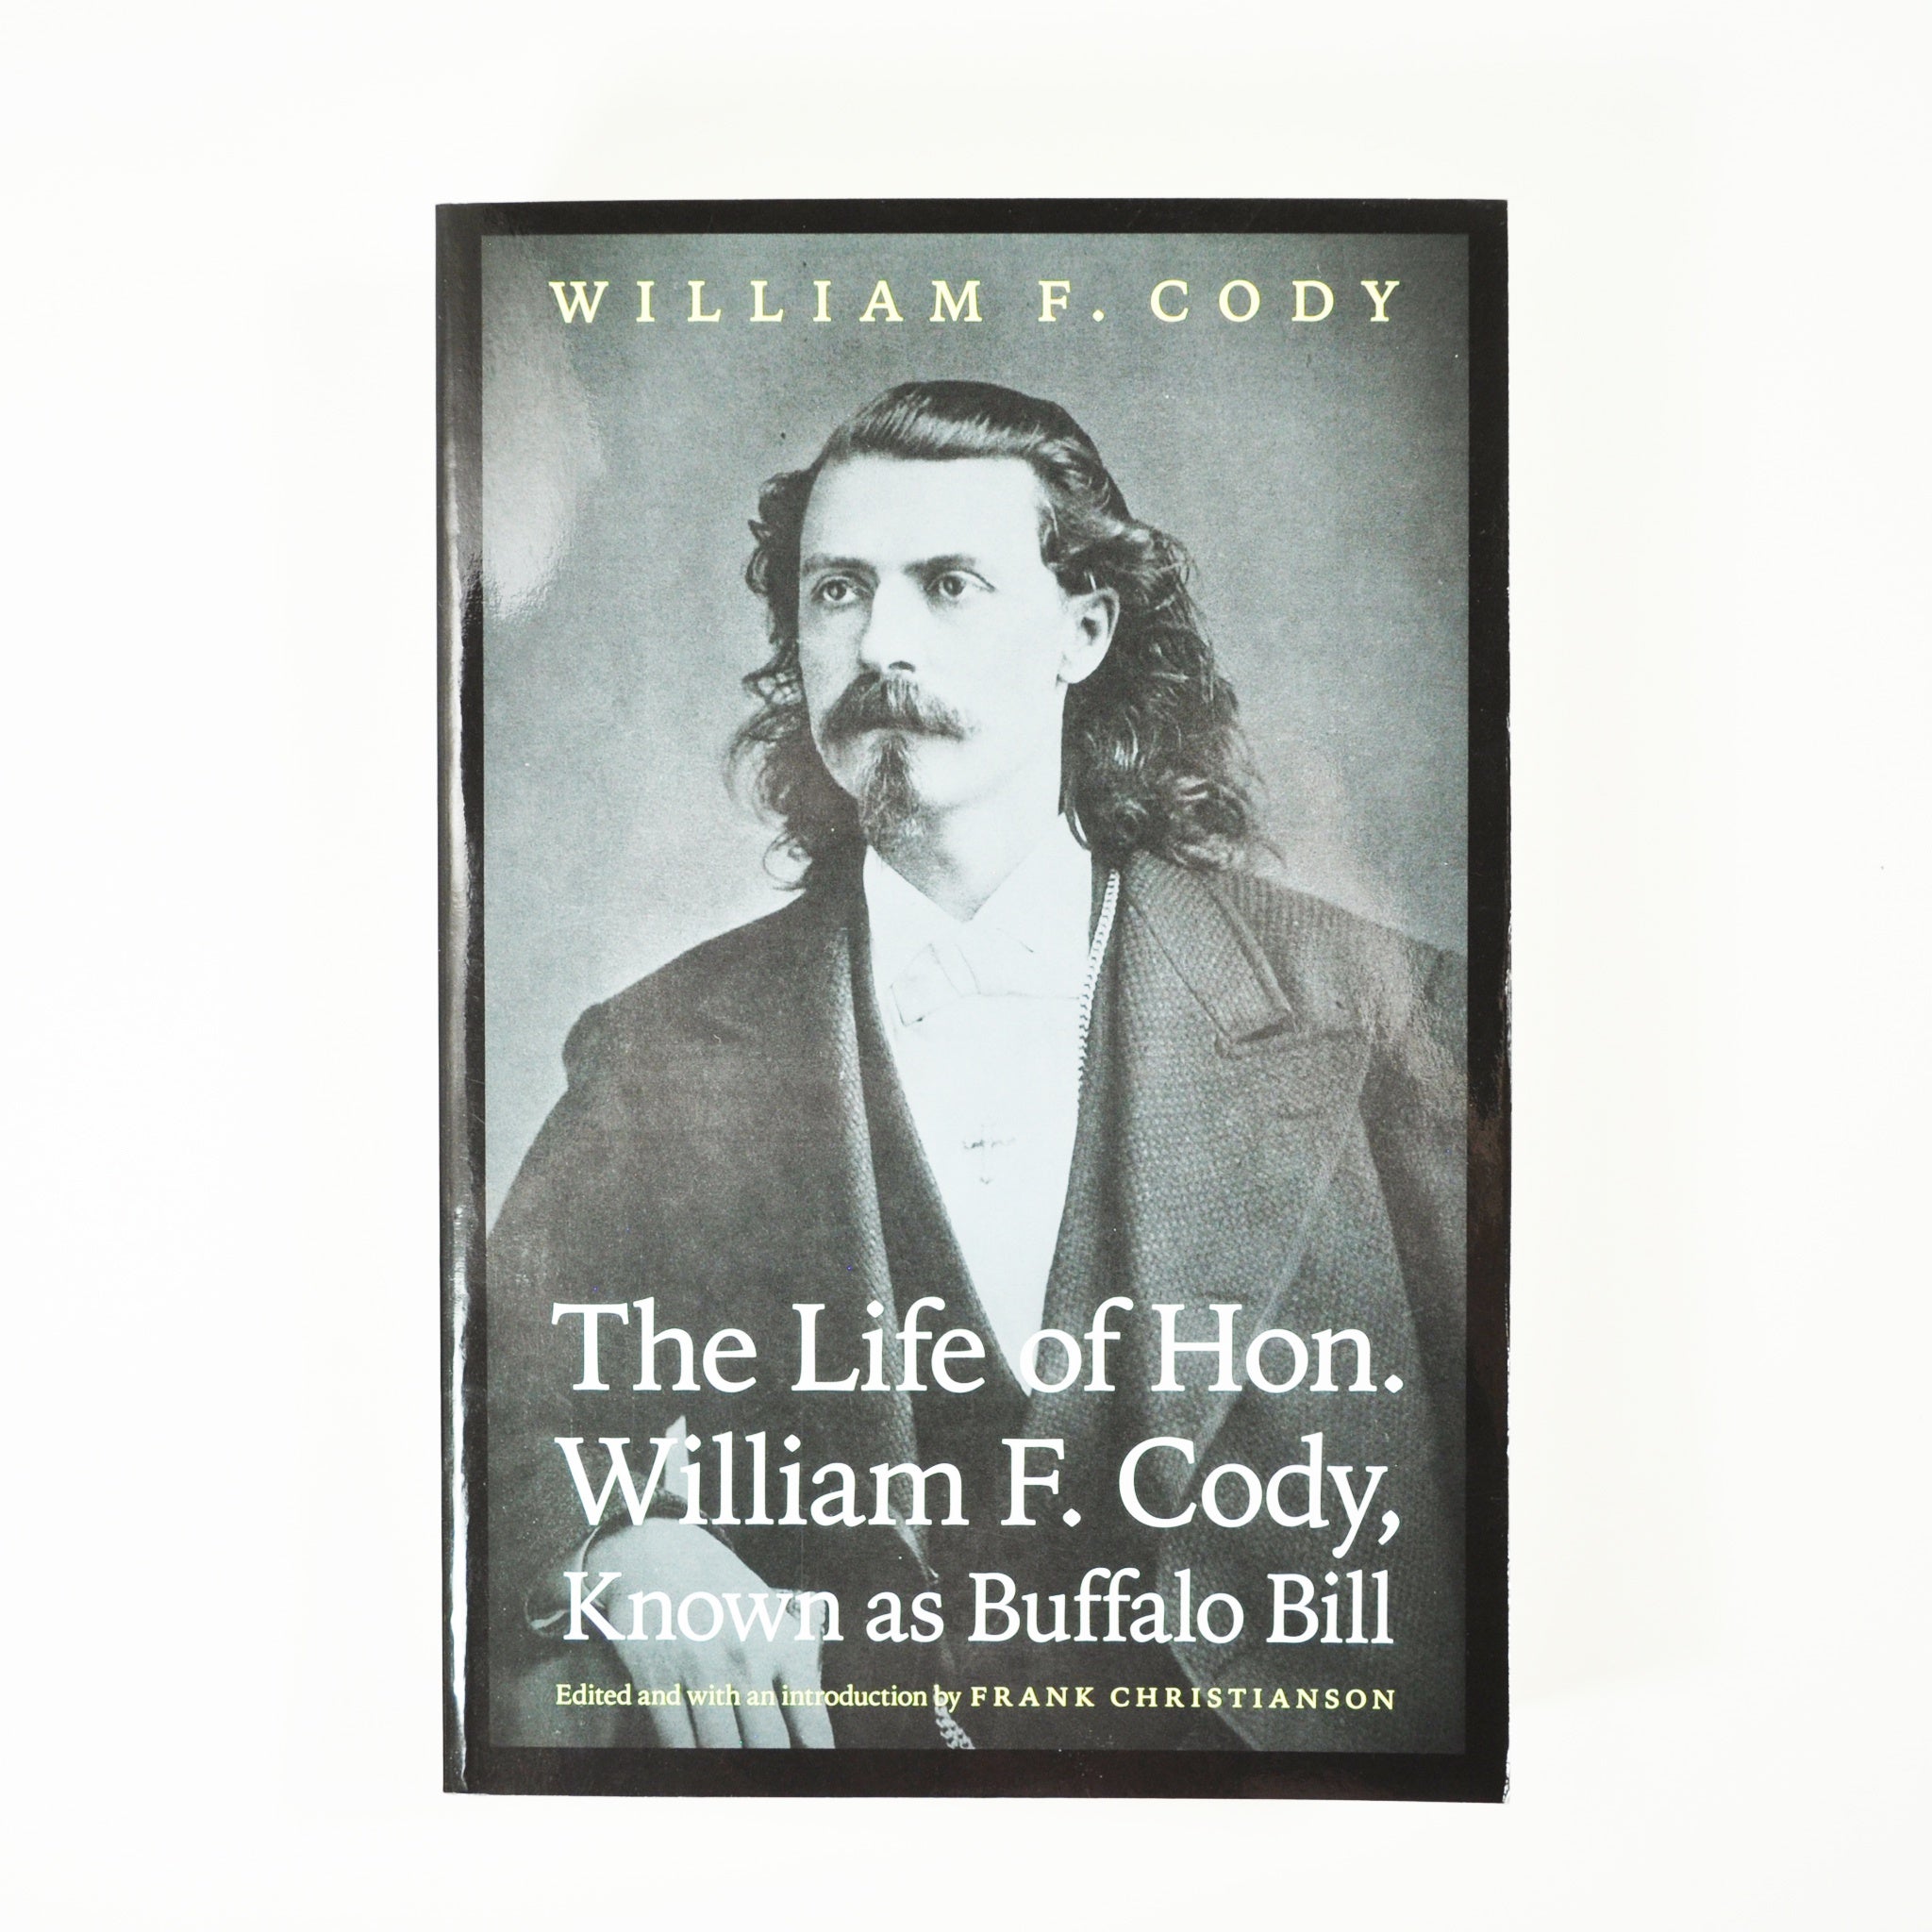 BK 1 THE LIFE OF HON . WILLIAM F. CODY KNOWN AS BUFFALO BILL BY FRANK CHRISTIANSON #21032883 D2 OCT23